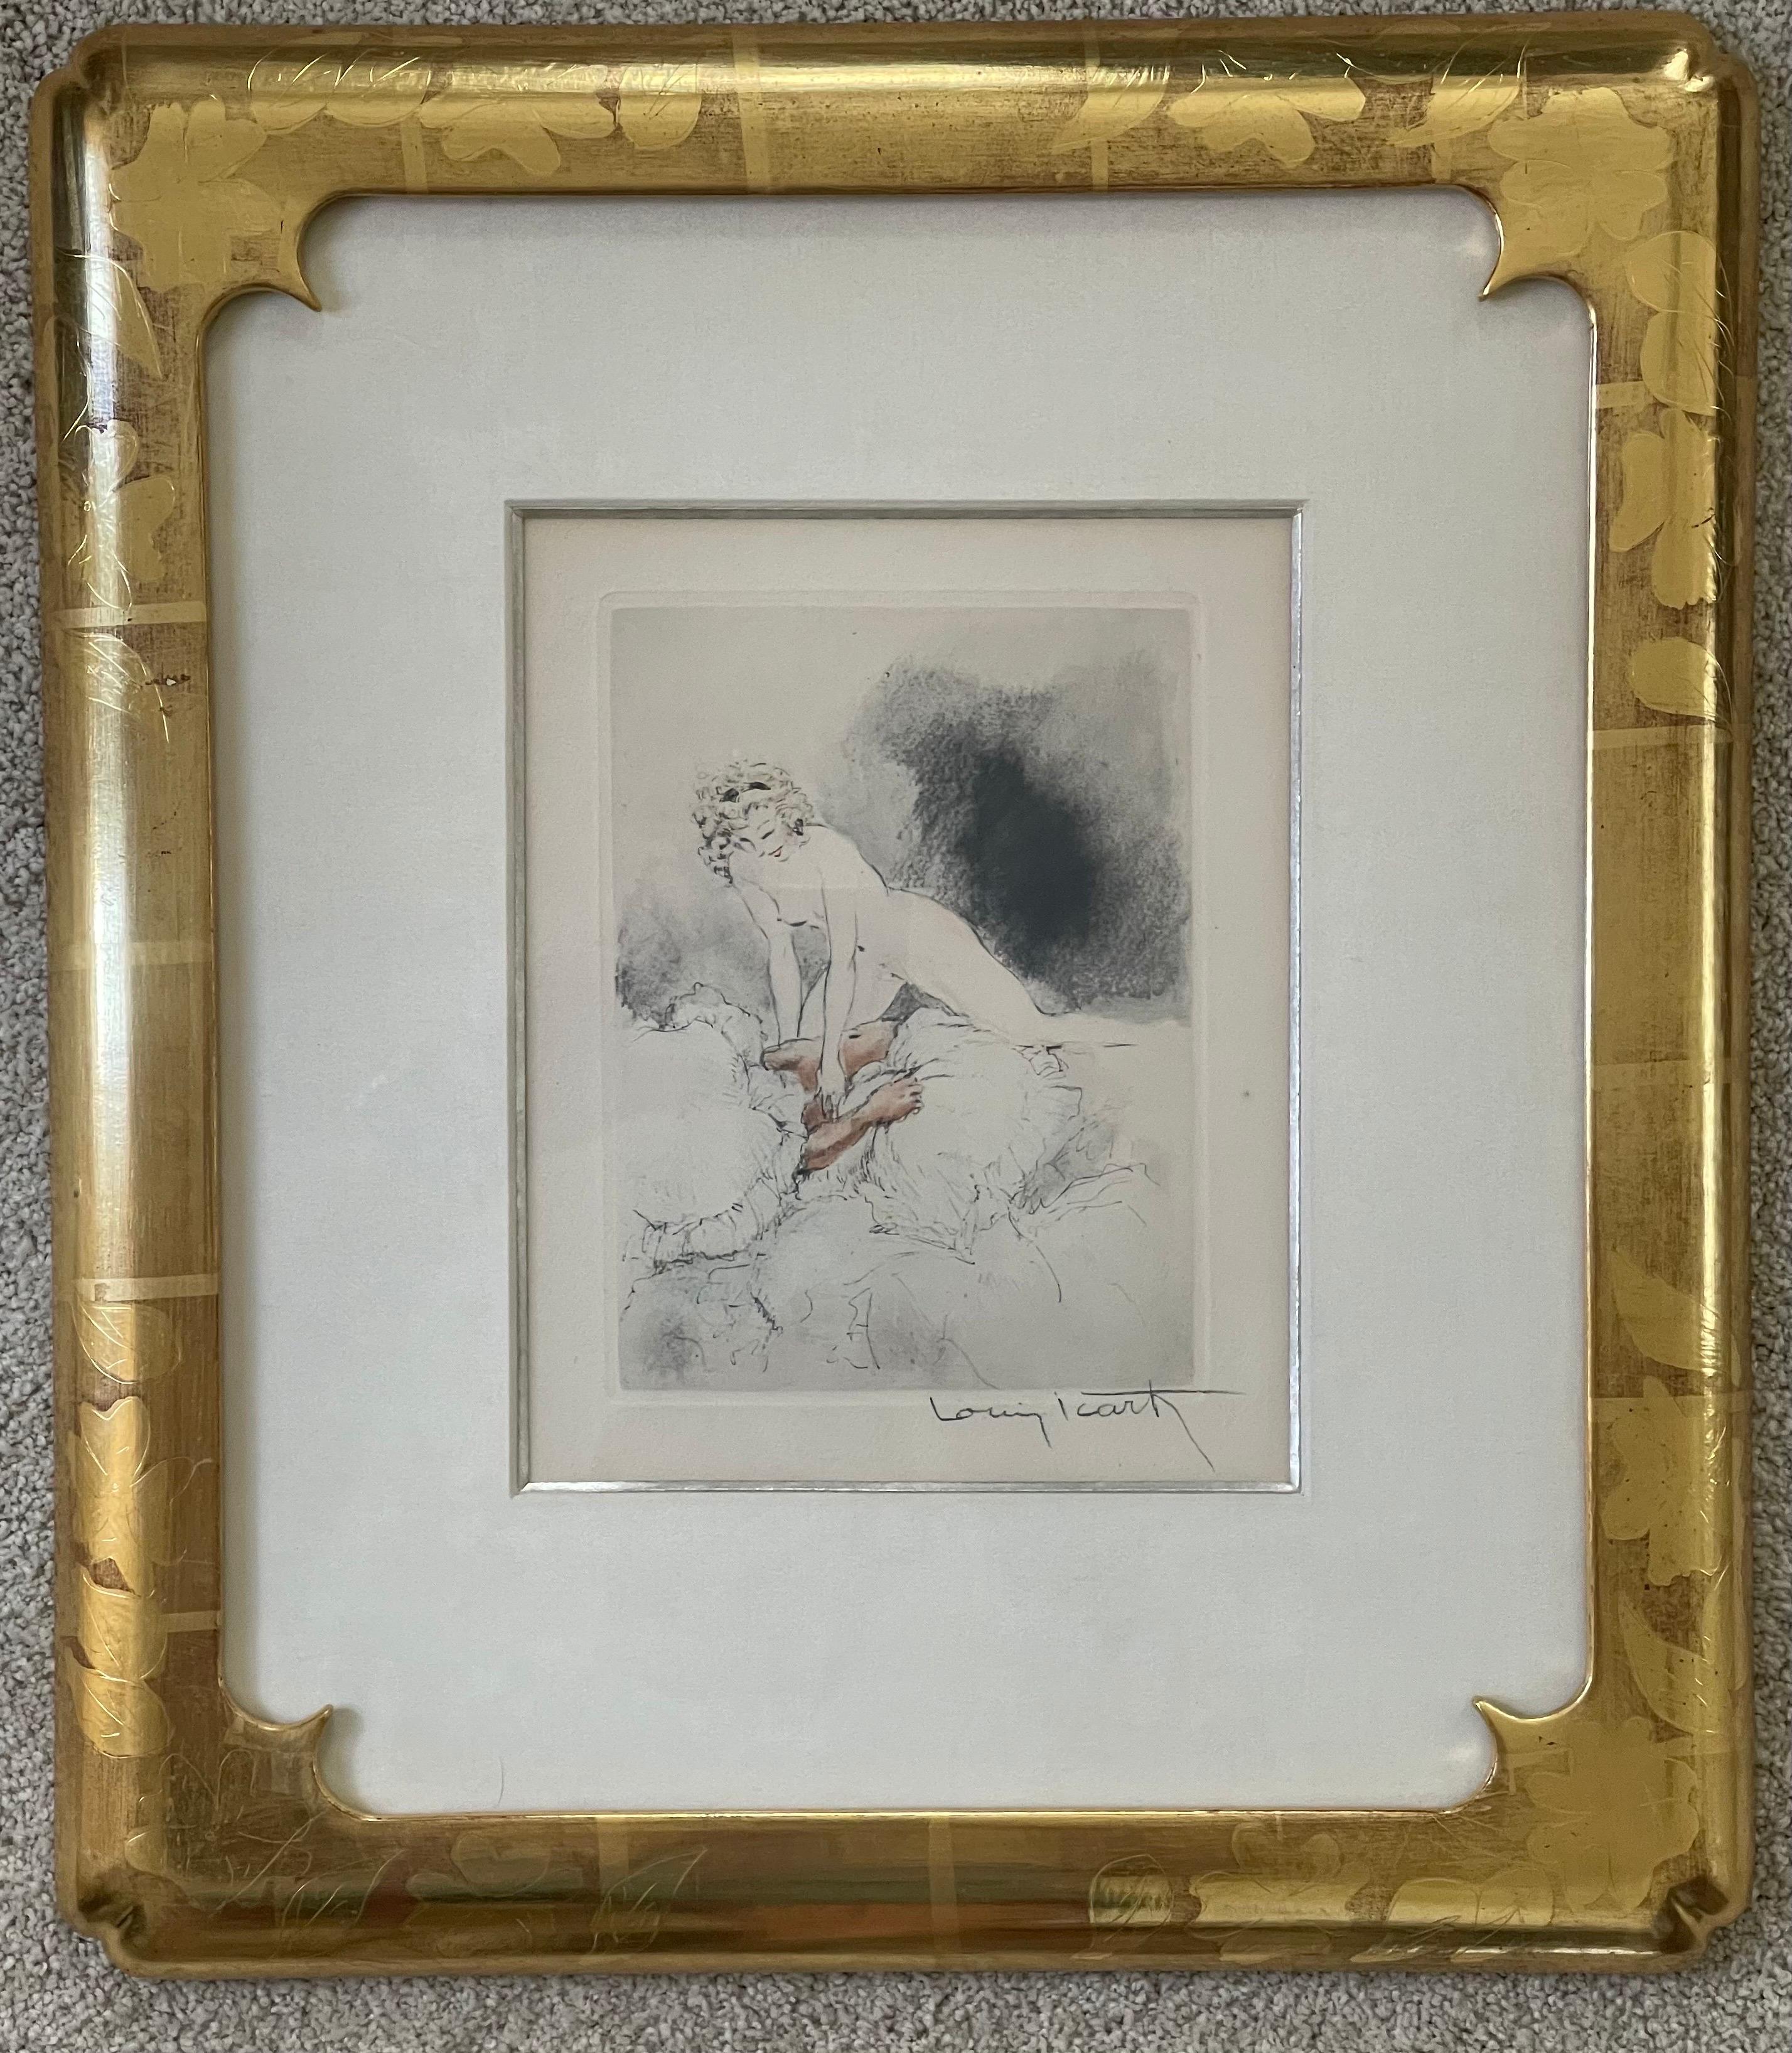 Erotica Etching by Louis Icart from the 